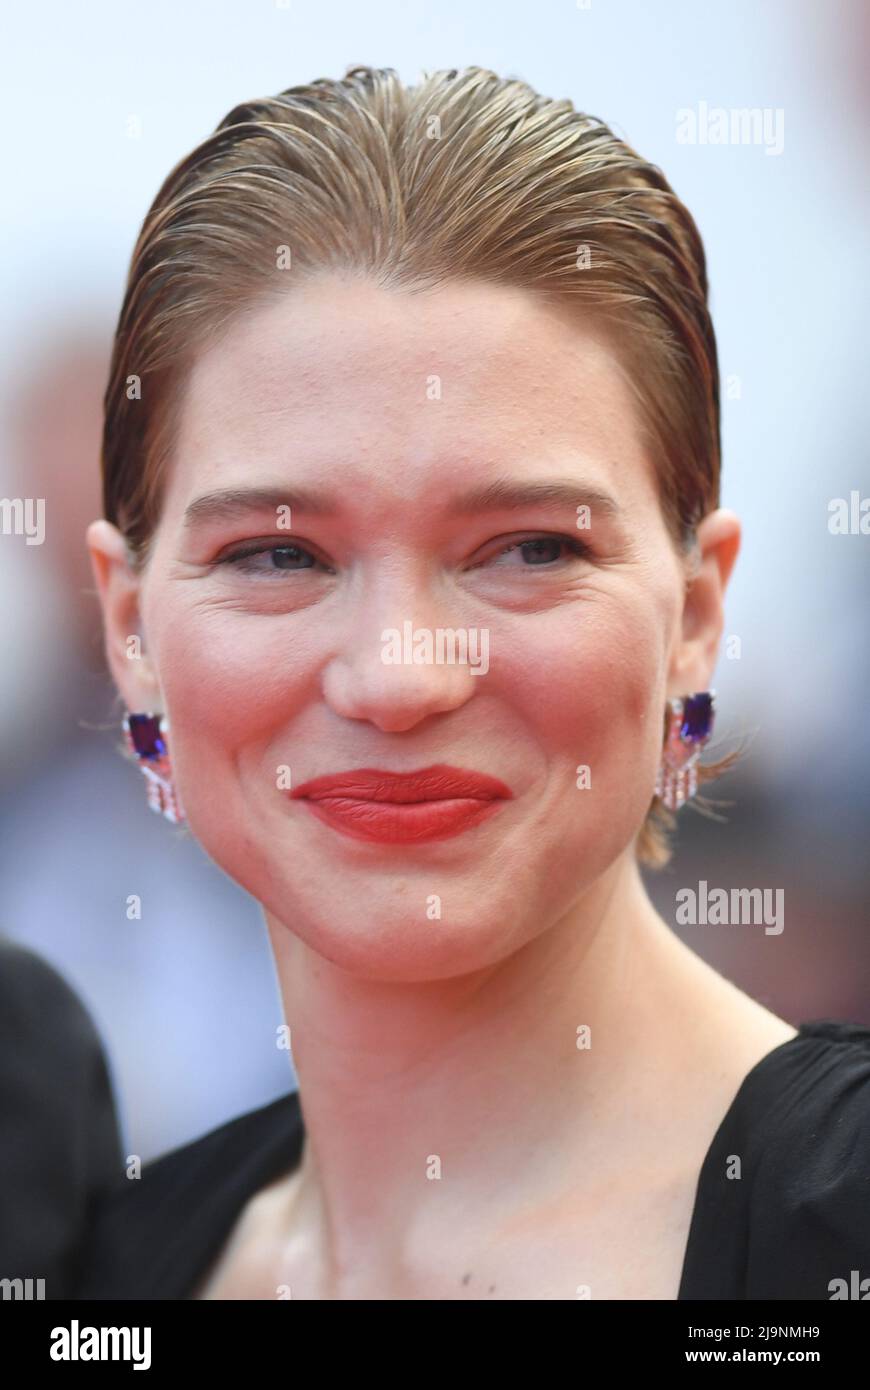 Cannes, France. 24th May, 2022. May 24th, 2022. Cannes, France. Lea Seydoux  attending The Innocent Premiere, part of the 75th Cannes Film Festival,  Palais de Festival, Cannes. Credit: Doug Peters/Alamy Live News